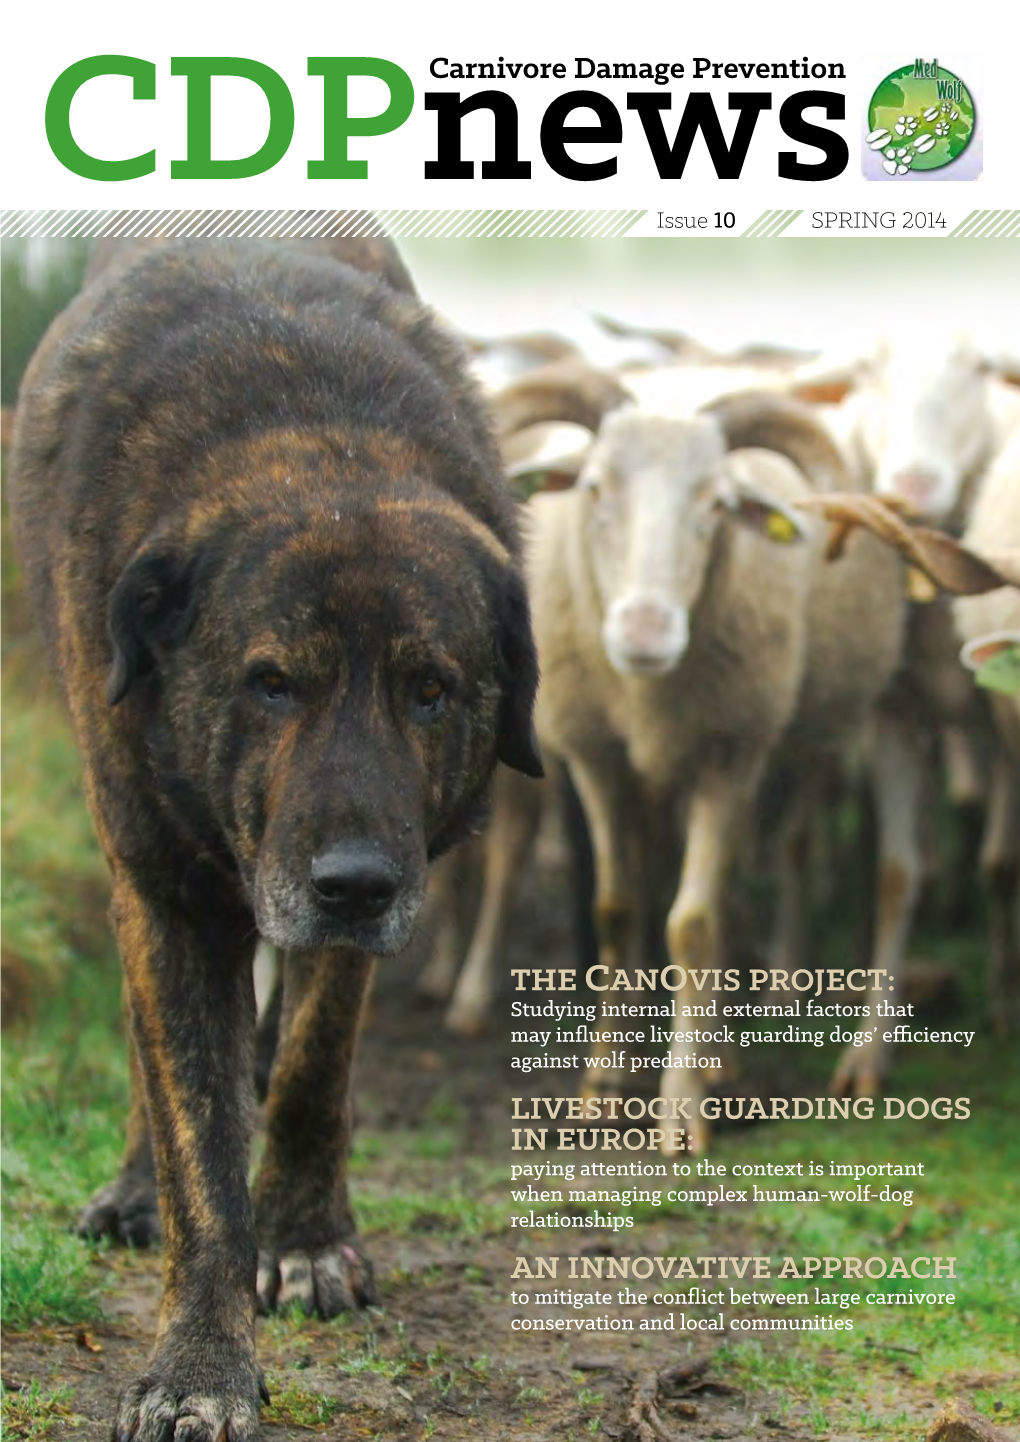 LIVESTOCK GUARDING DOGS in EUROPE: Paying Attention to the Context Is Important When Managing Complex Human-Wolf-Dog Relationships